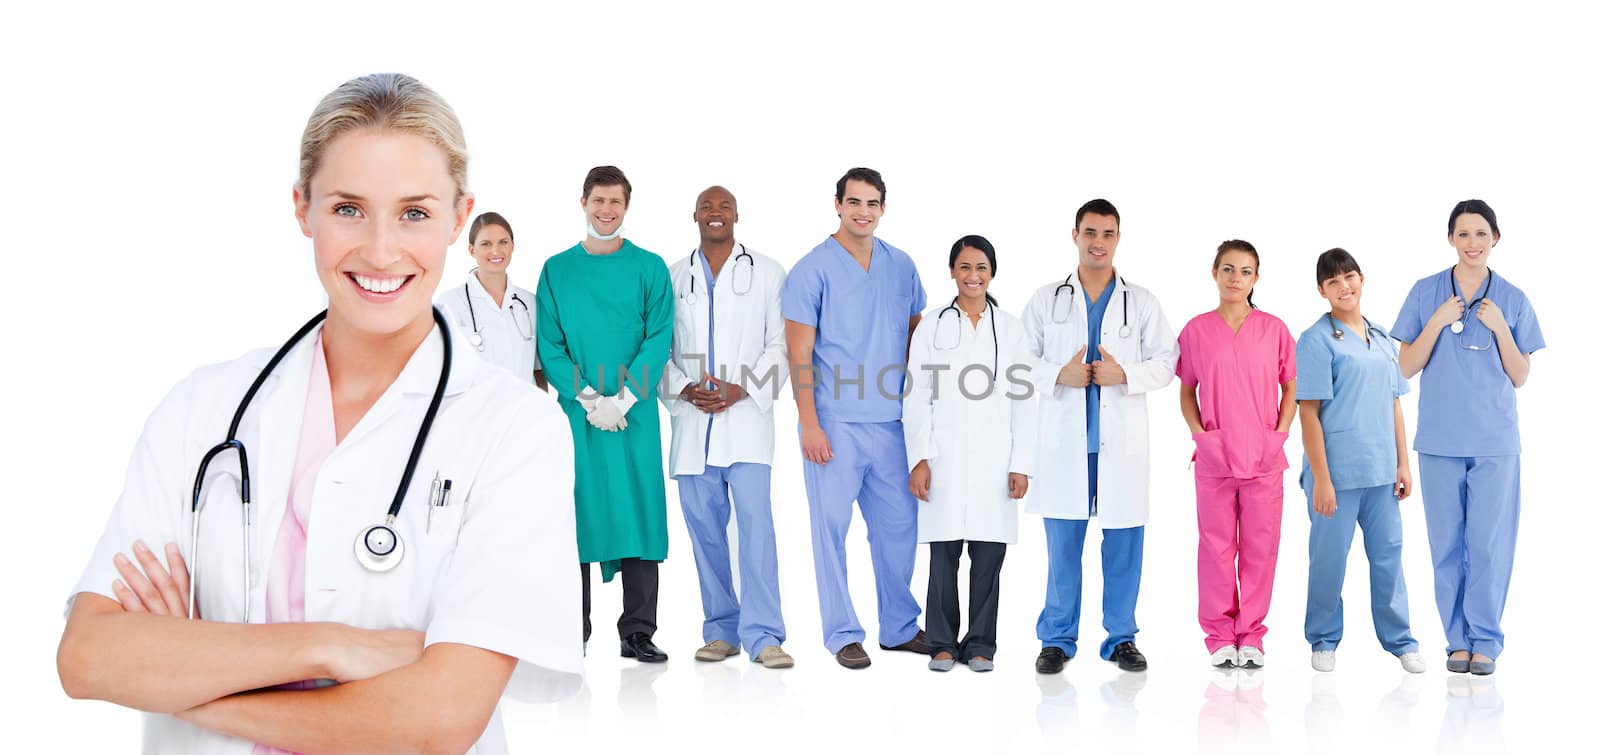 Smiling doctor standing in front of her medical team in line on white background